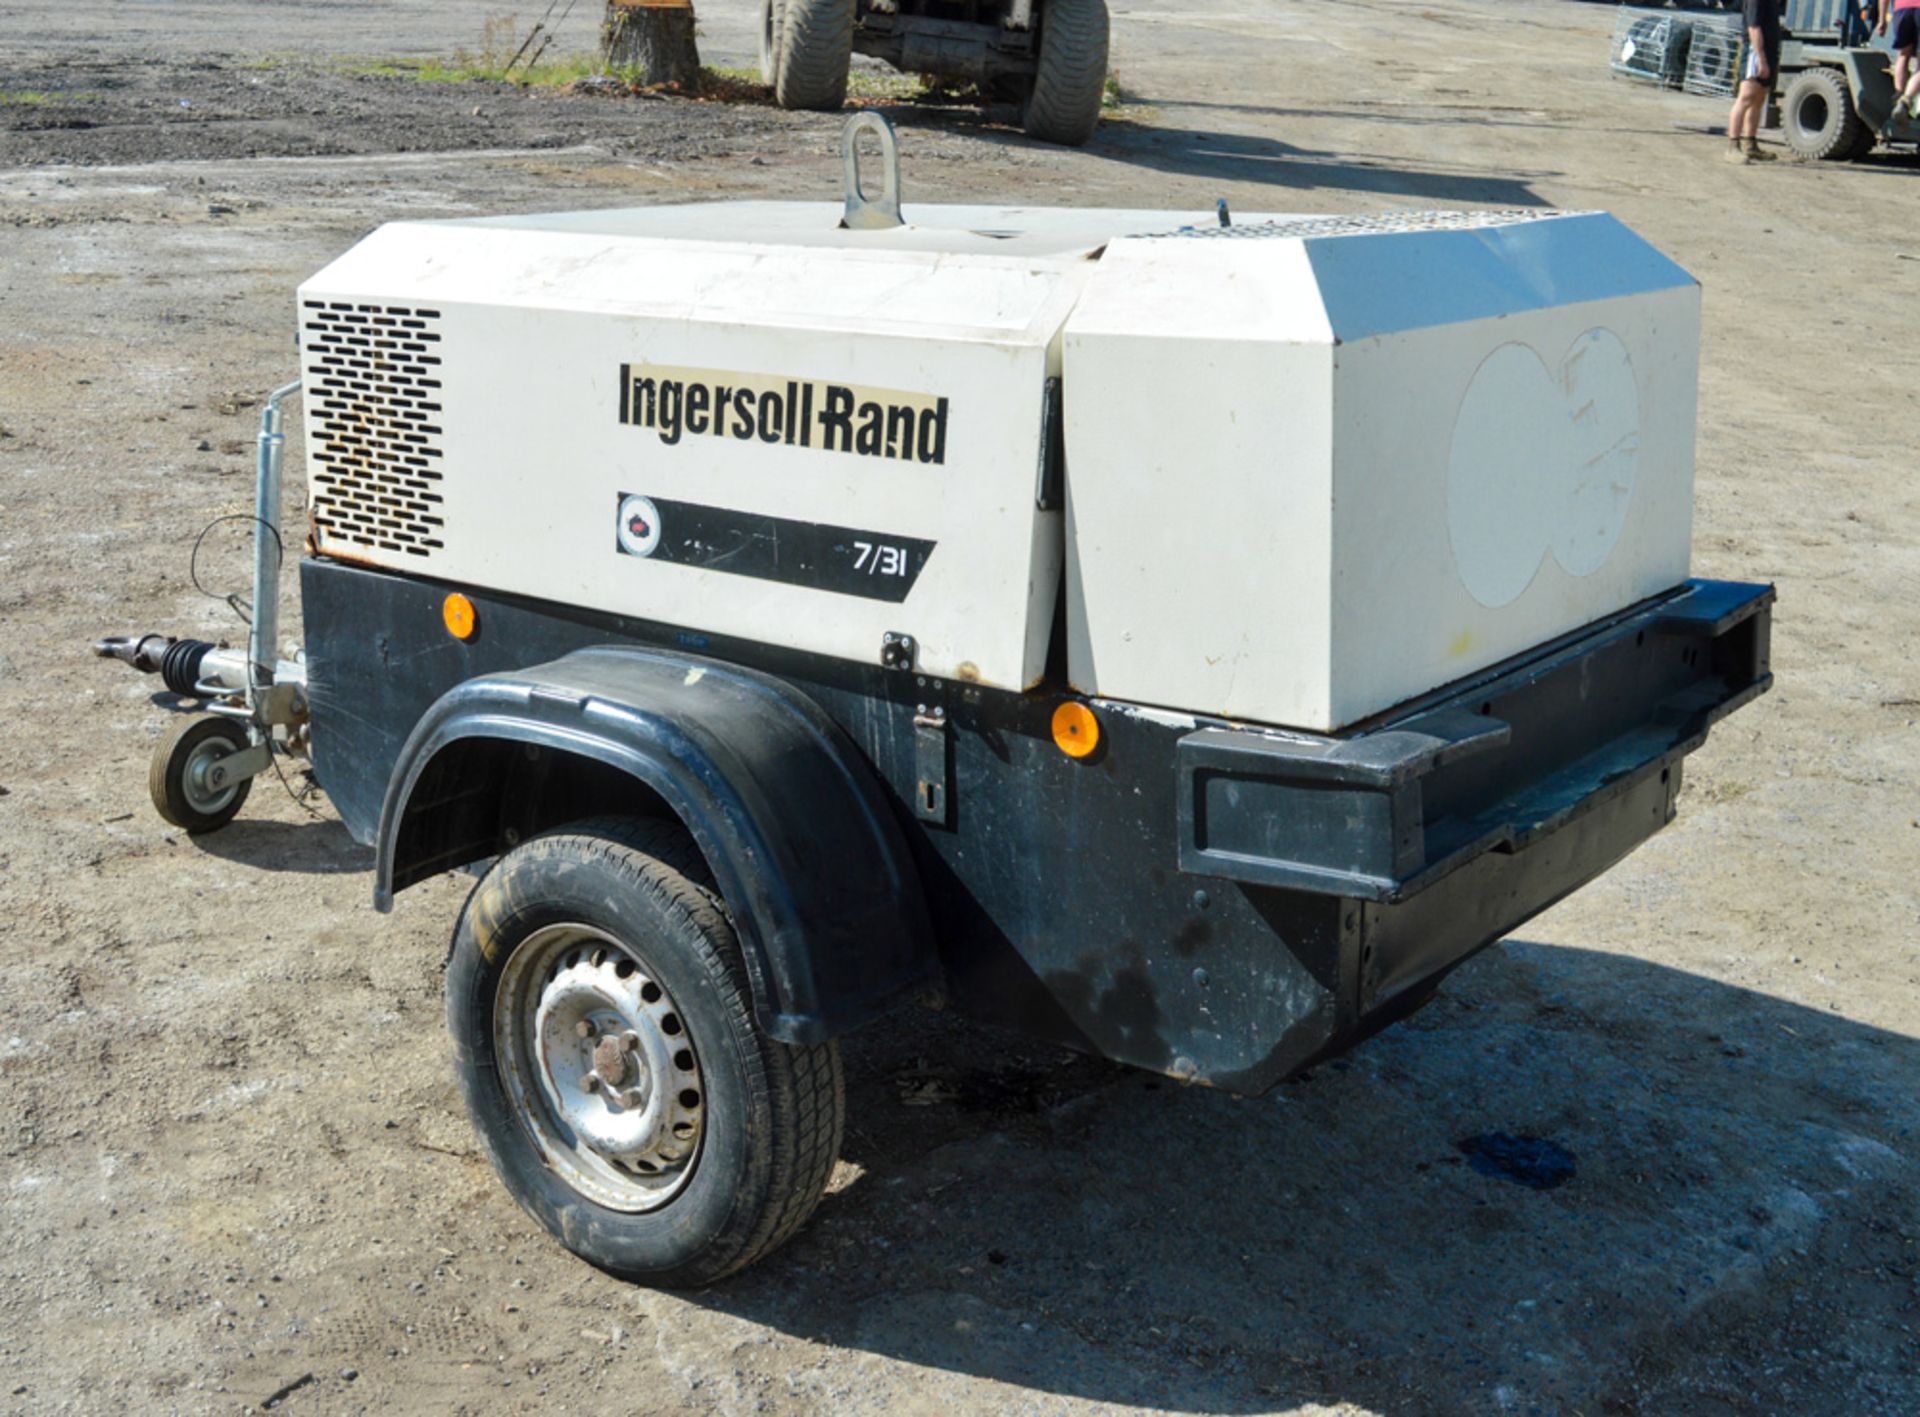 Ingersoll Rand 7/31 diesel driven mobile air compressor/generator Year: 2005 S/N: 317808 Recorded - Image 3 of 5